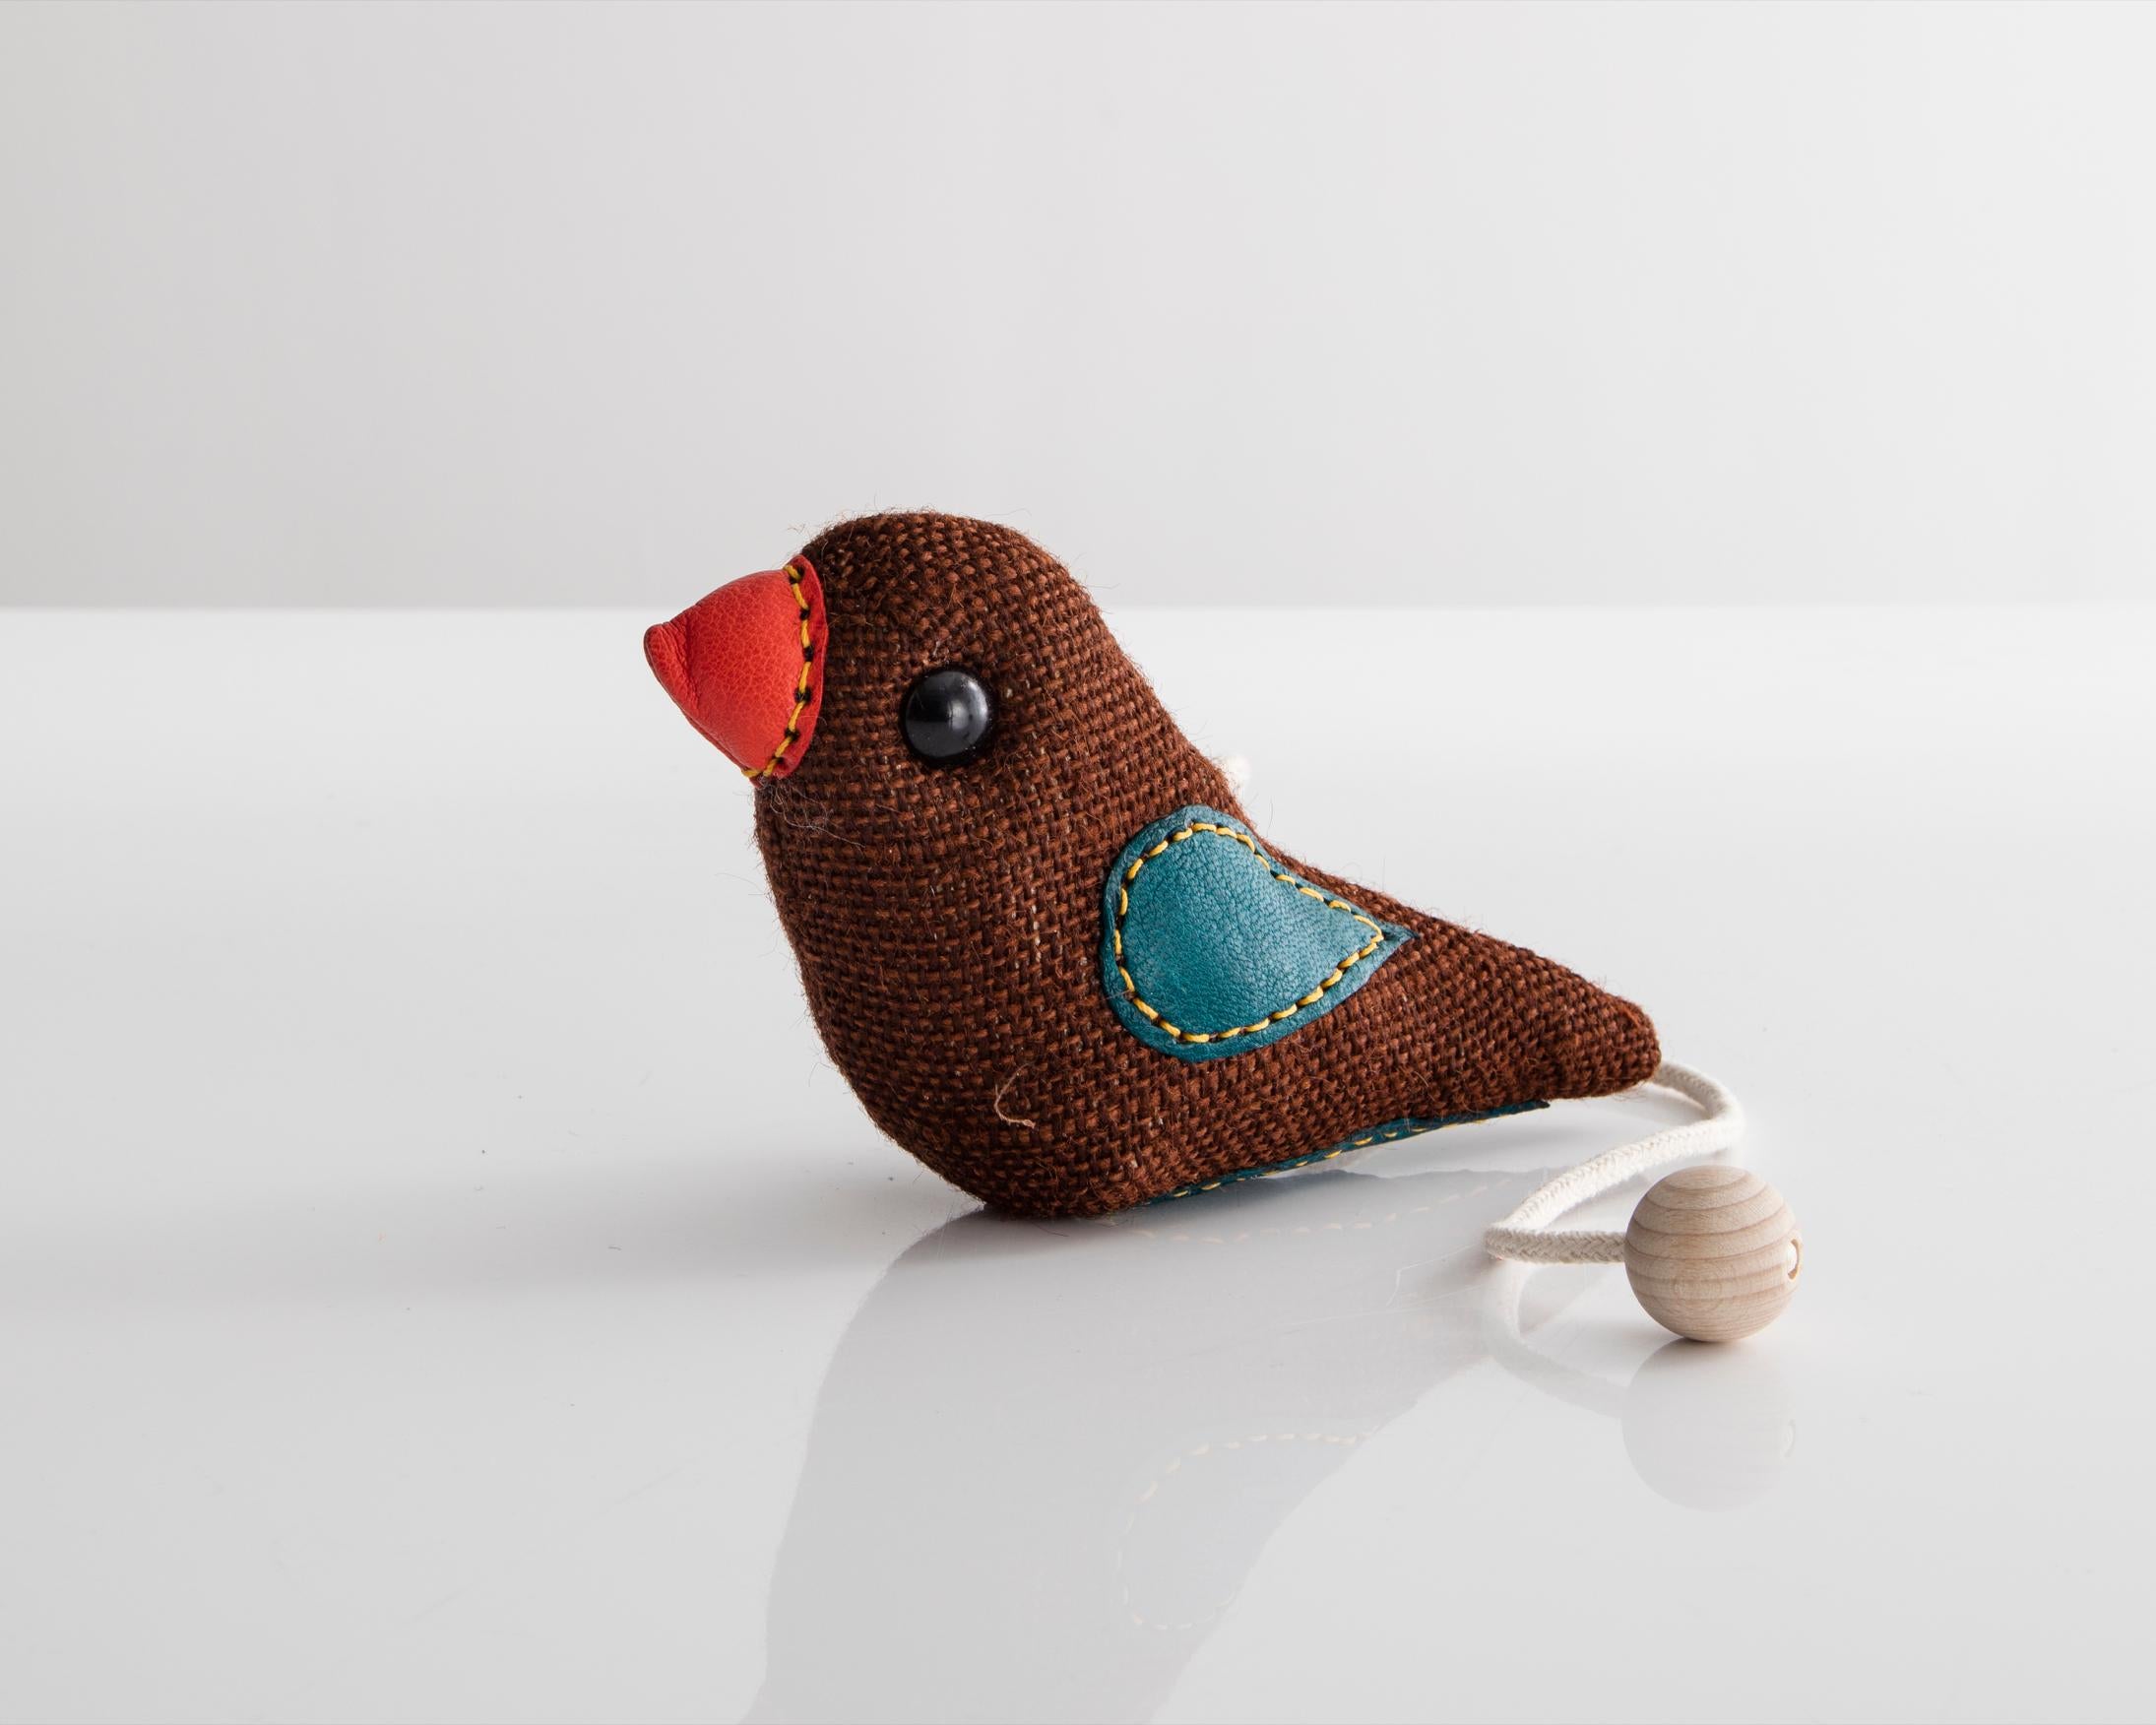 German Therapeutic Bird Toy in Brown Jute with Leather by Renate Müller, 1981-1982